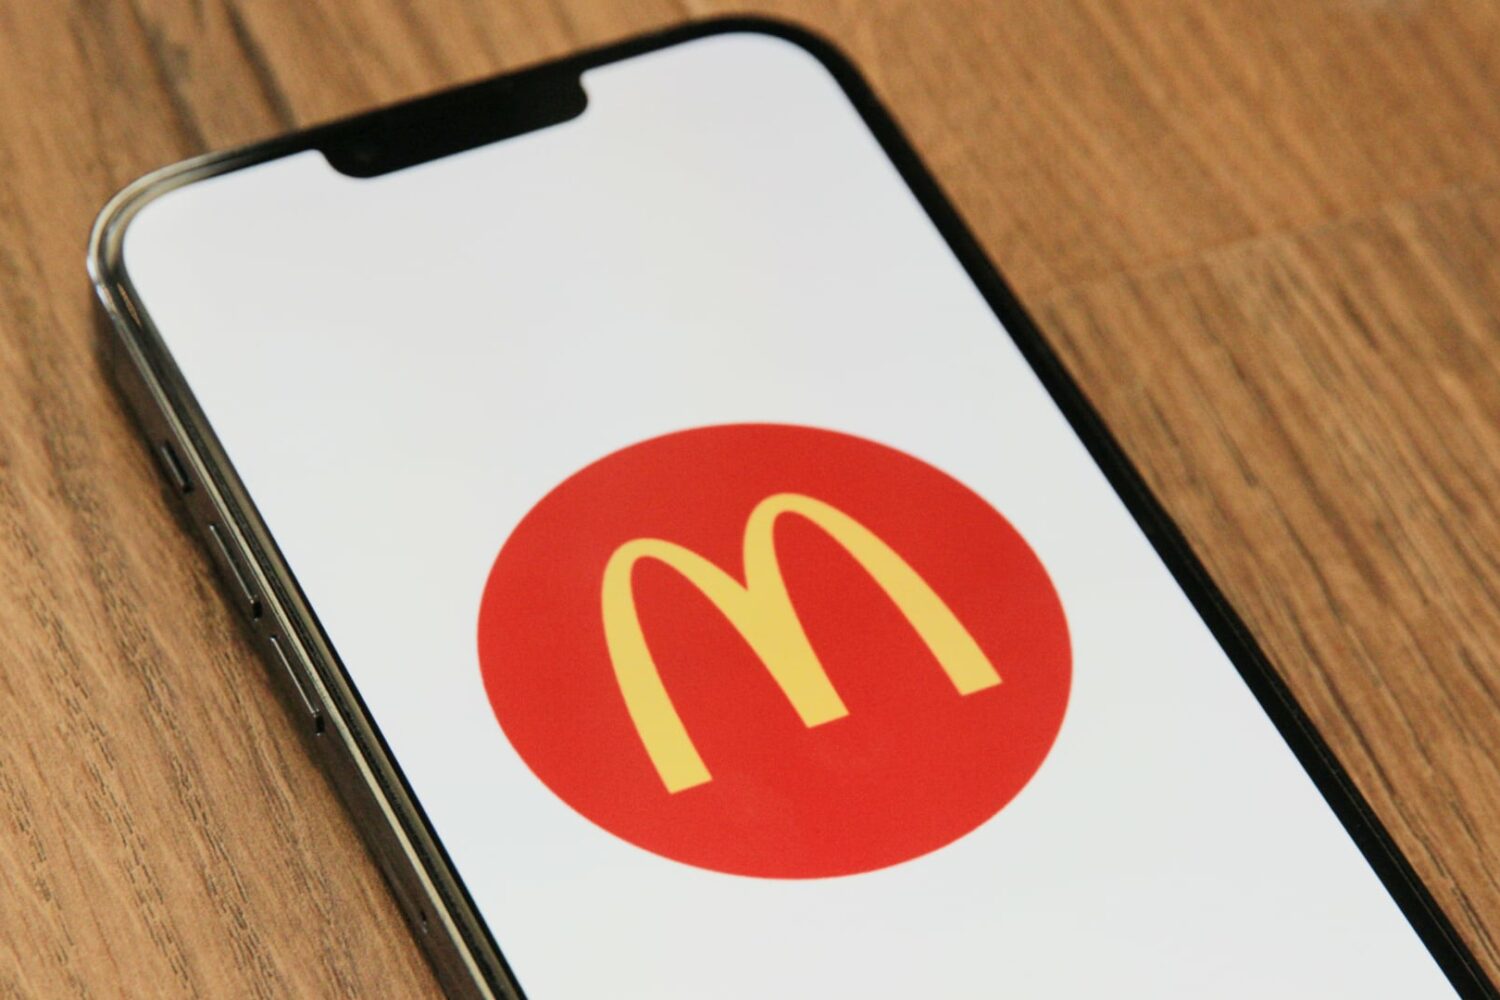 iPhone resting on a wooden table, showing the McDonald's logo